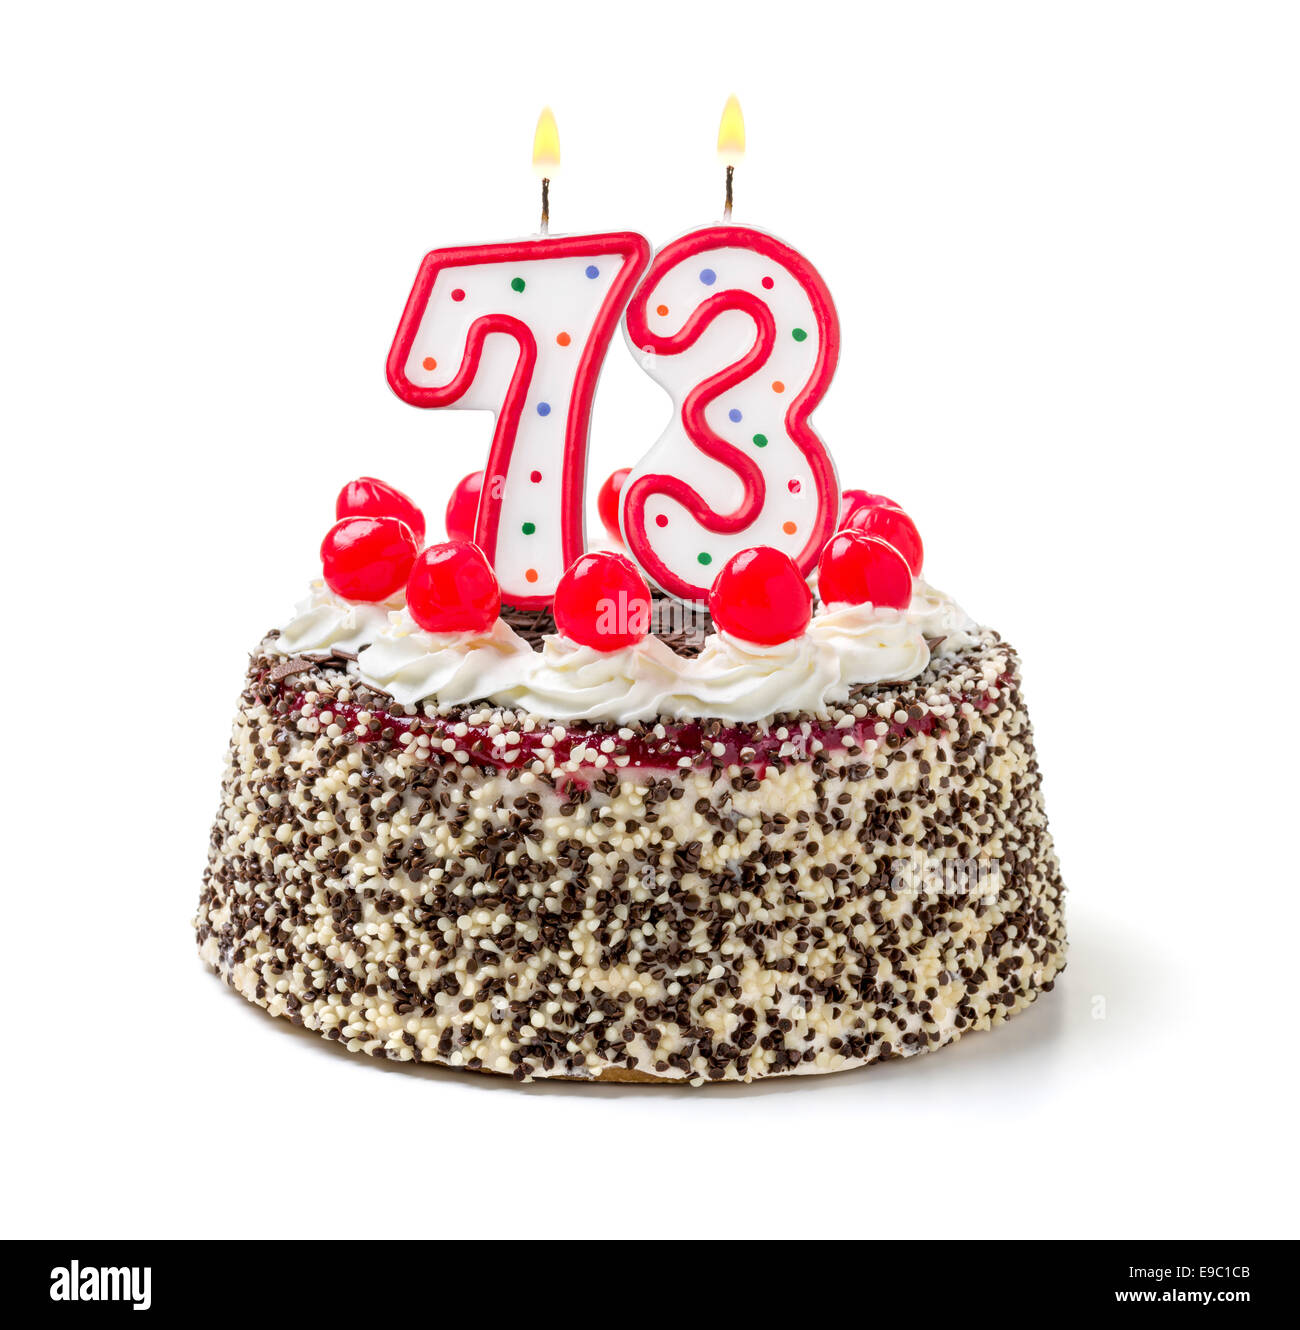 Birthday cake with burning candle number 73 Stock Photo, Royalty Free